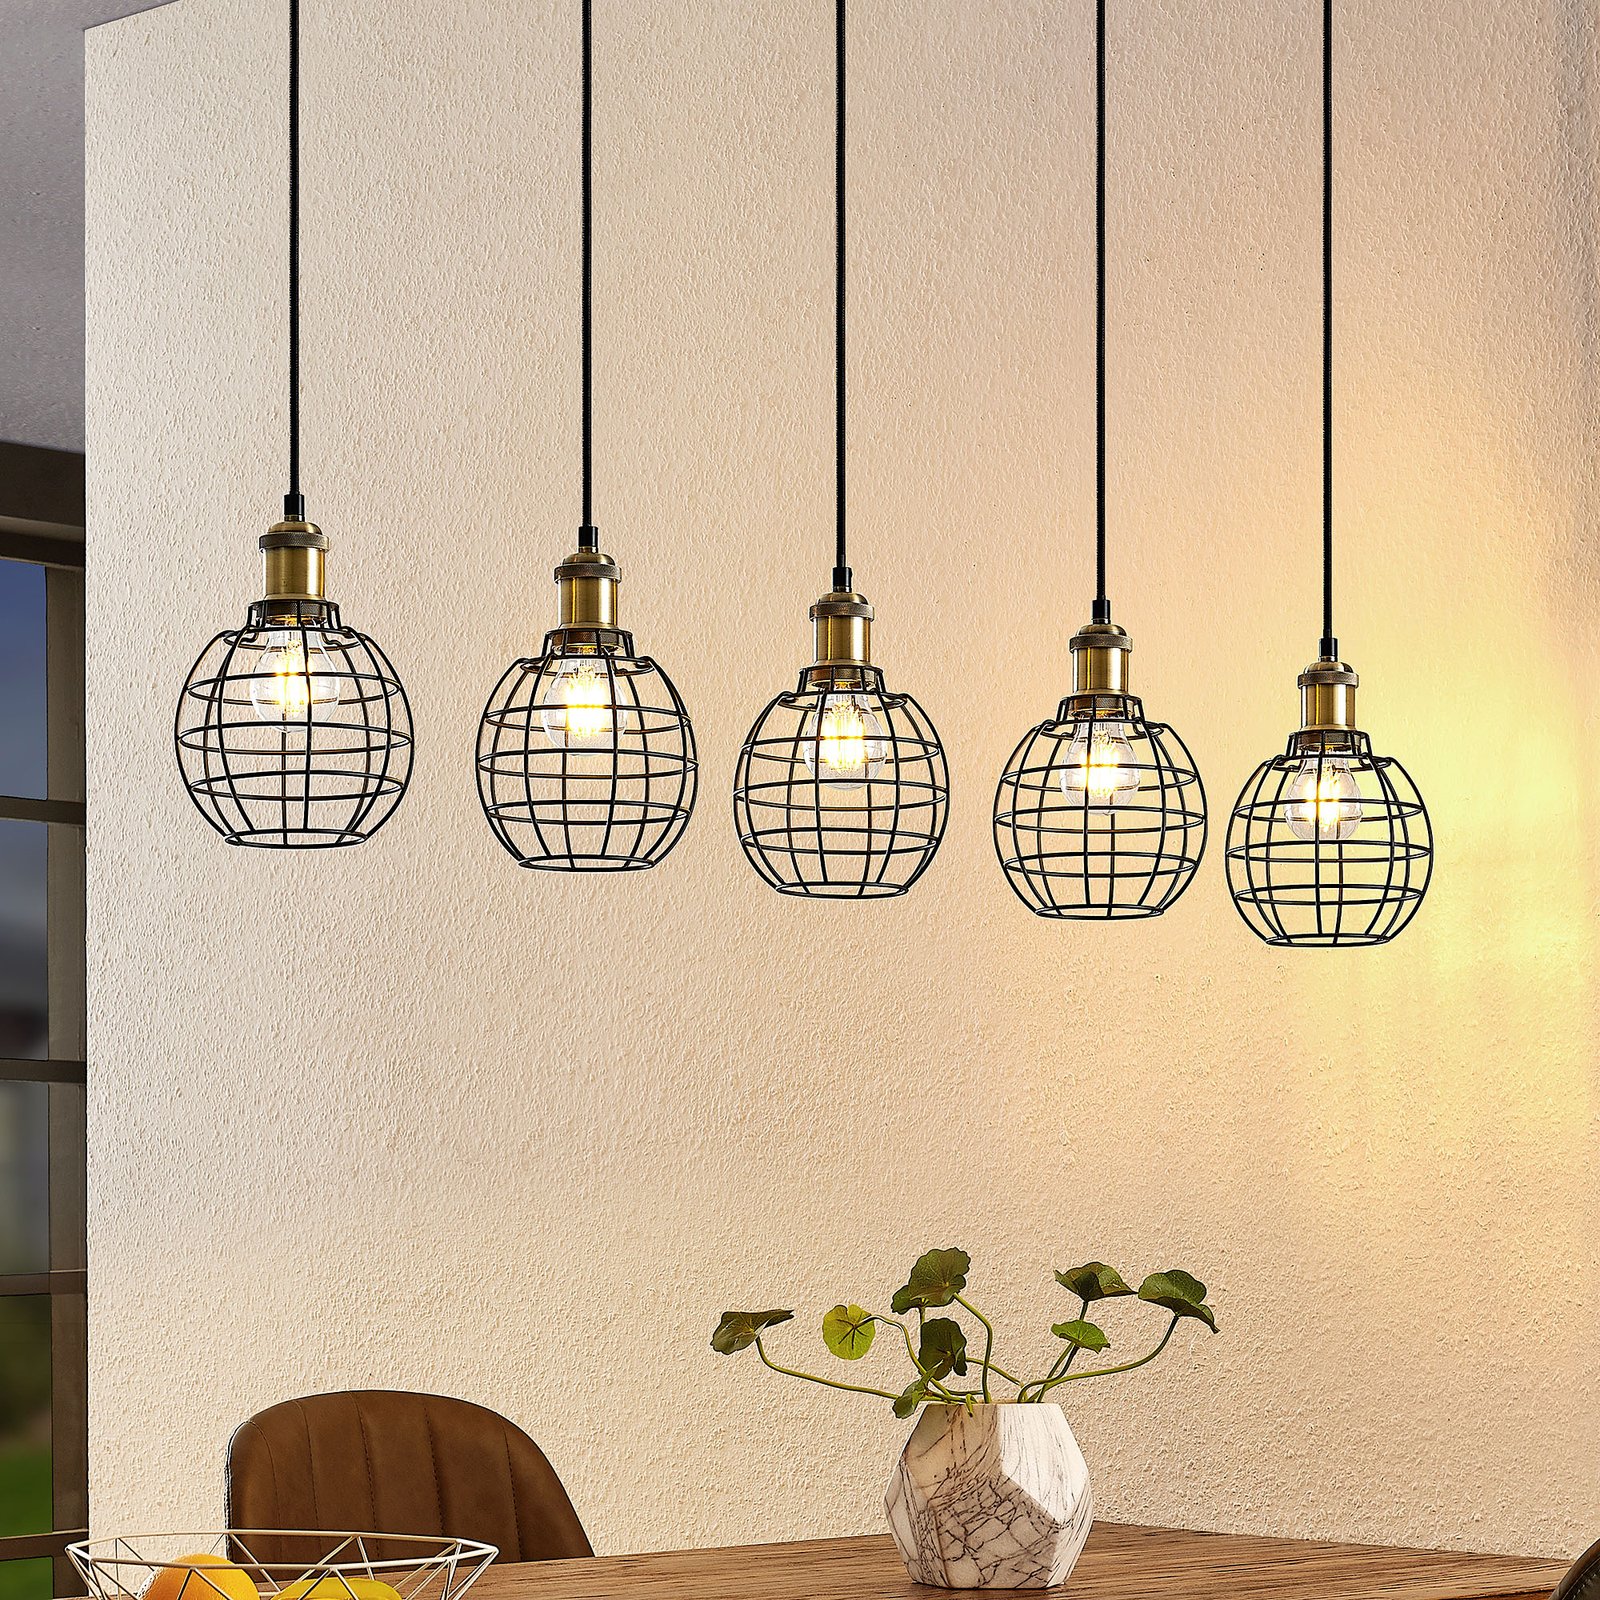 Lindby Alexej hanging light with a cage look